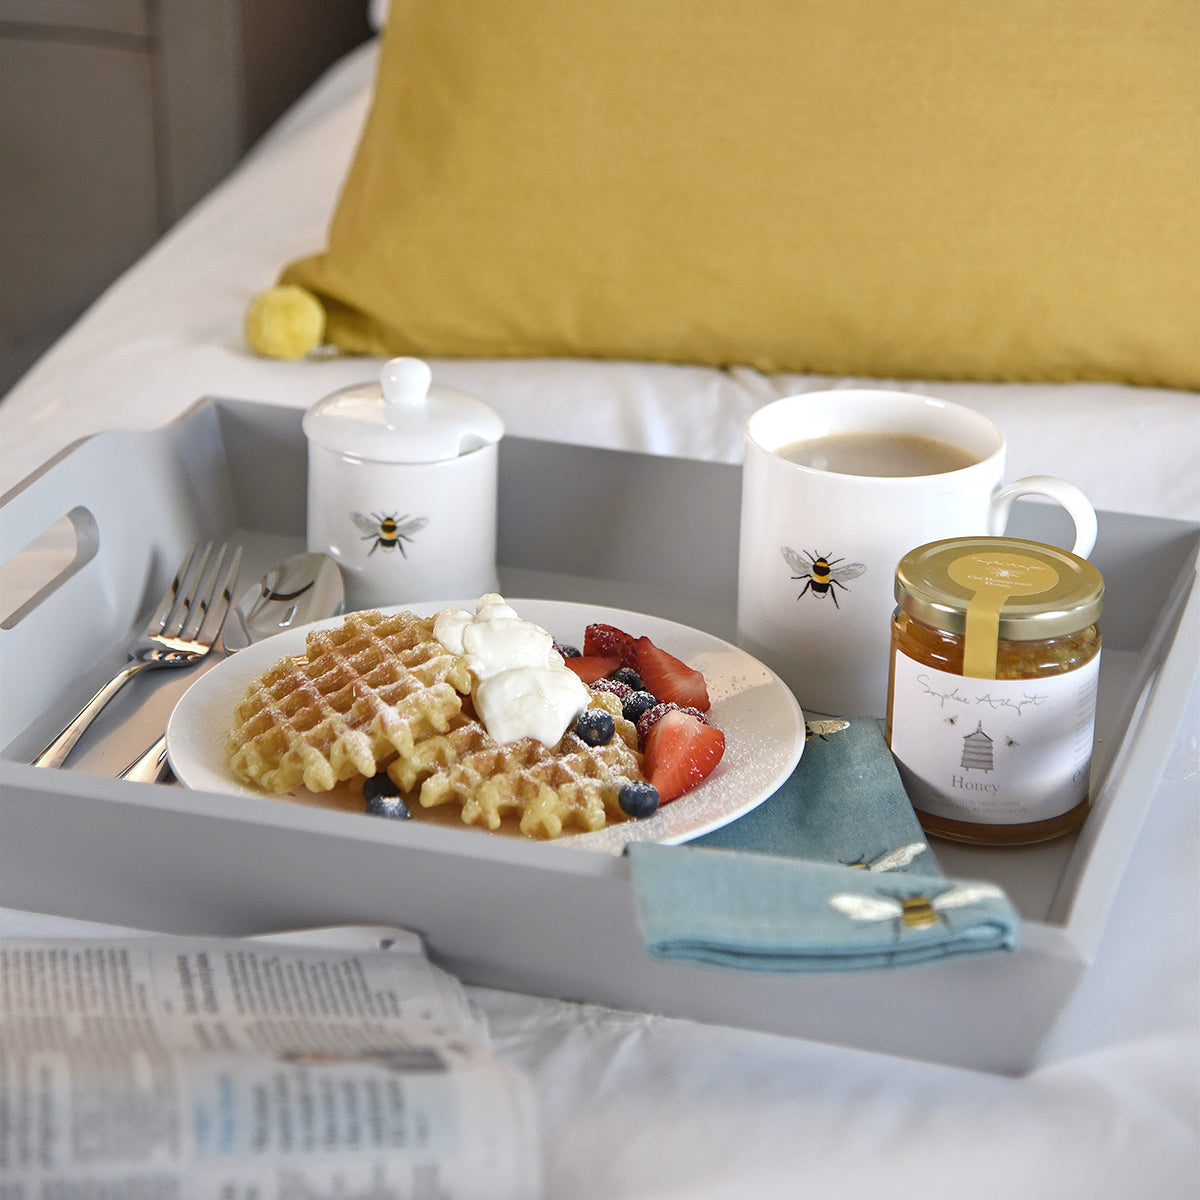 Breakfast in bed set up Bees Solo Fine Bone China Mug by Sophie Allport